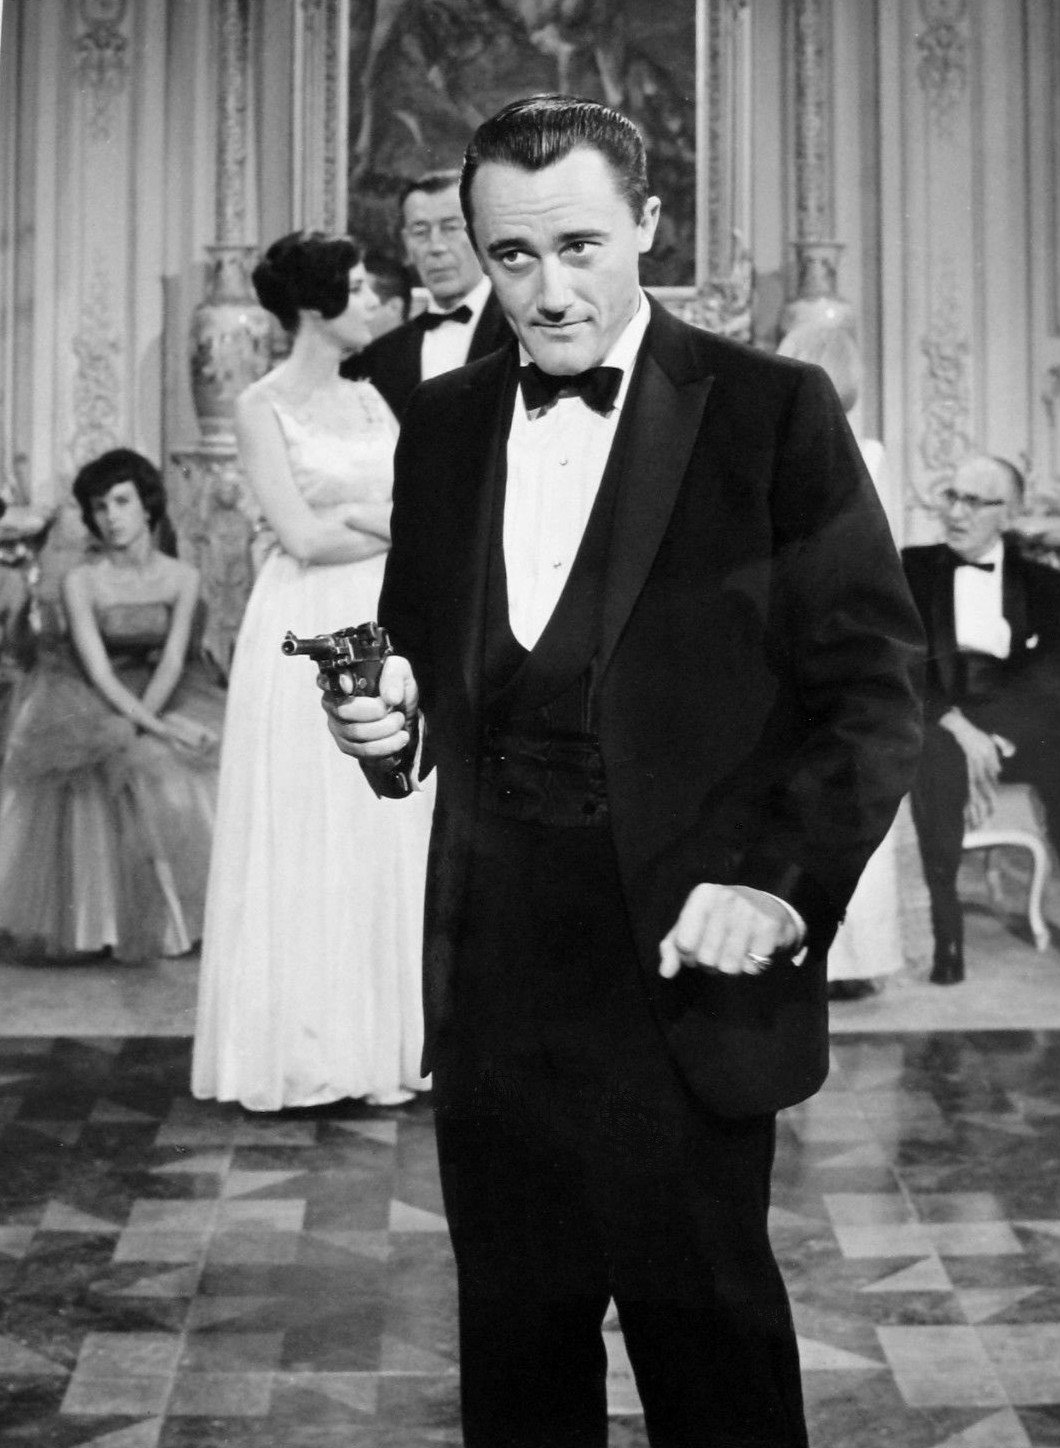 Photo of Robert Vaughn from the premiere episode of The Man from U.N.C.L.E. | Photo: NBC Television, Public domain, via Wikimedia Commons